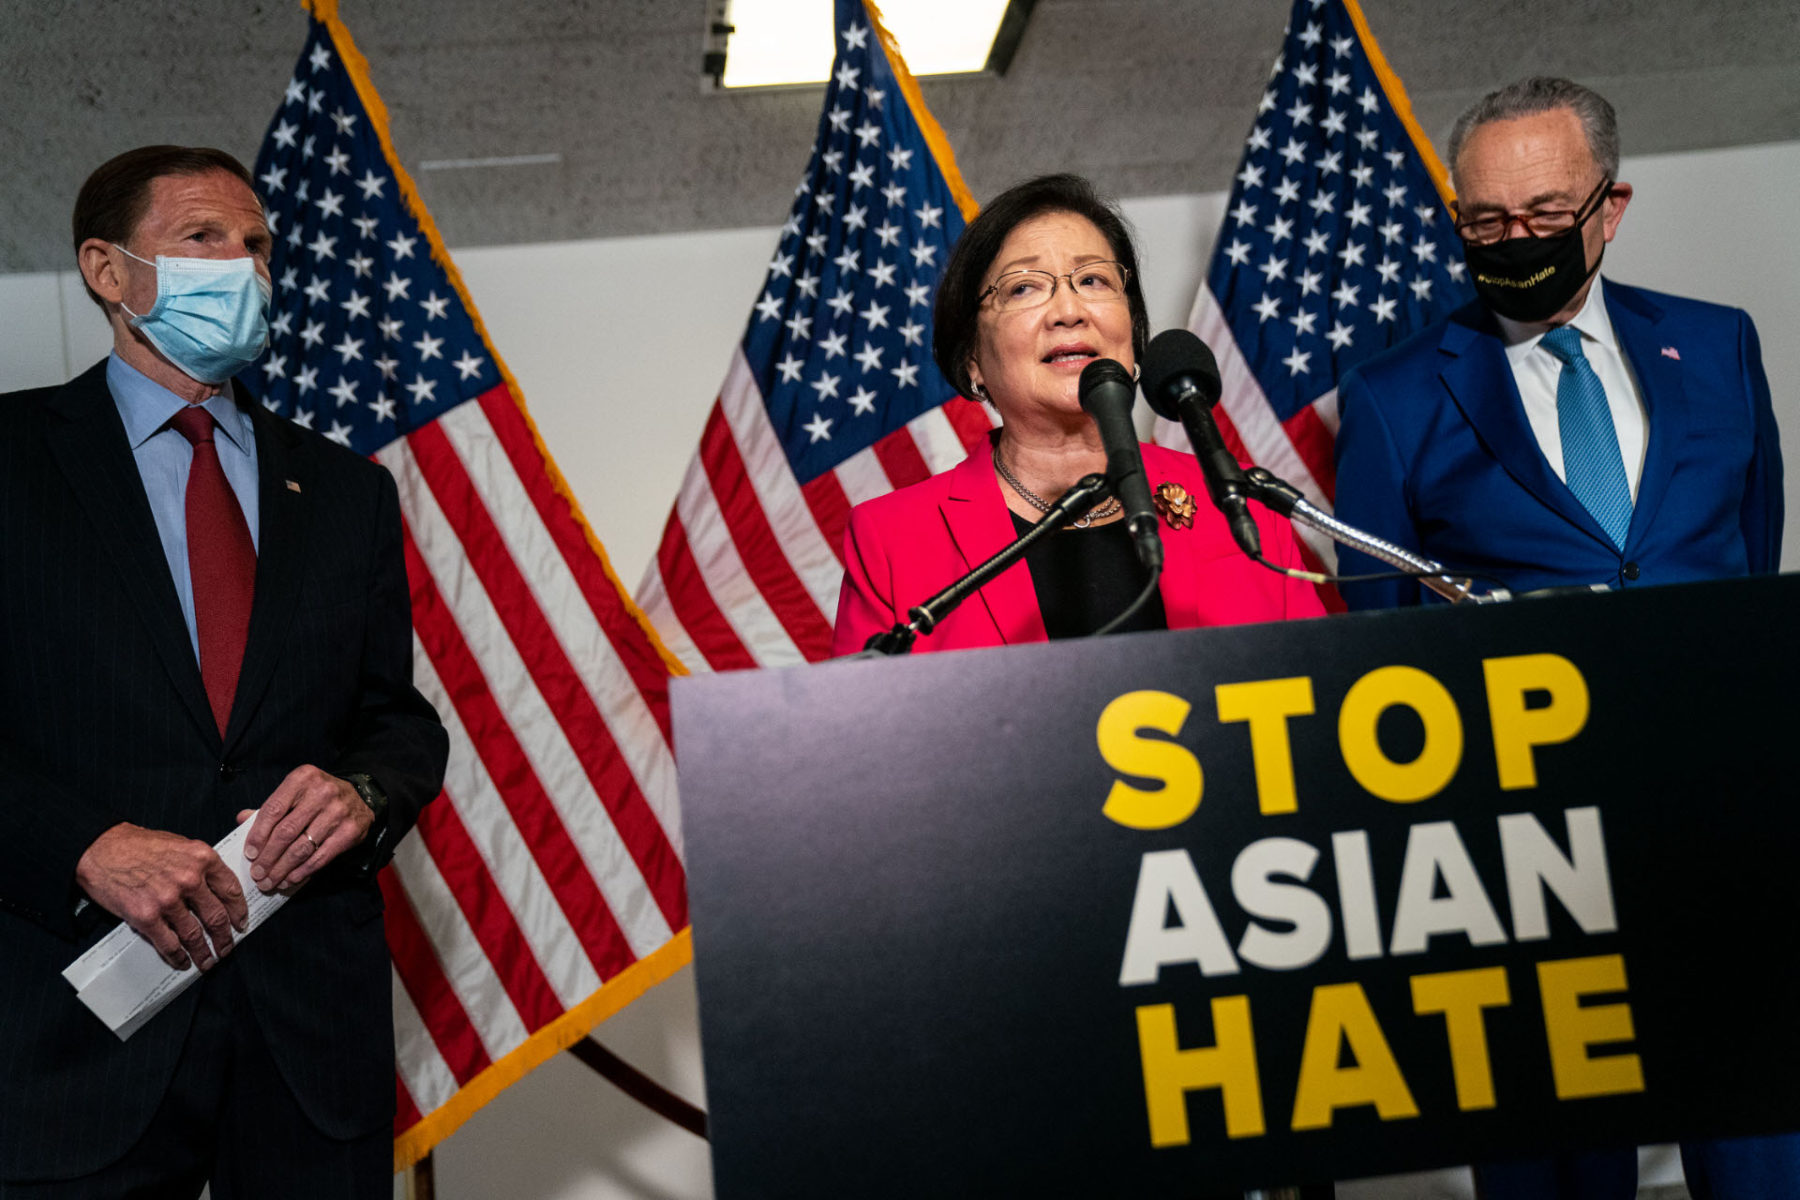 Amid the recent wave of violence against Asians in America, the Senate has passed a bill to combat hate crimes and discrimination.